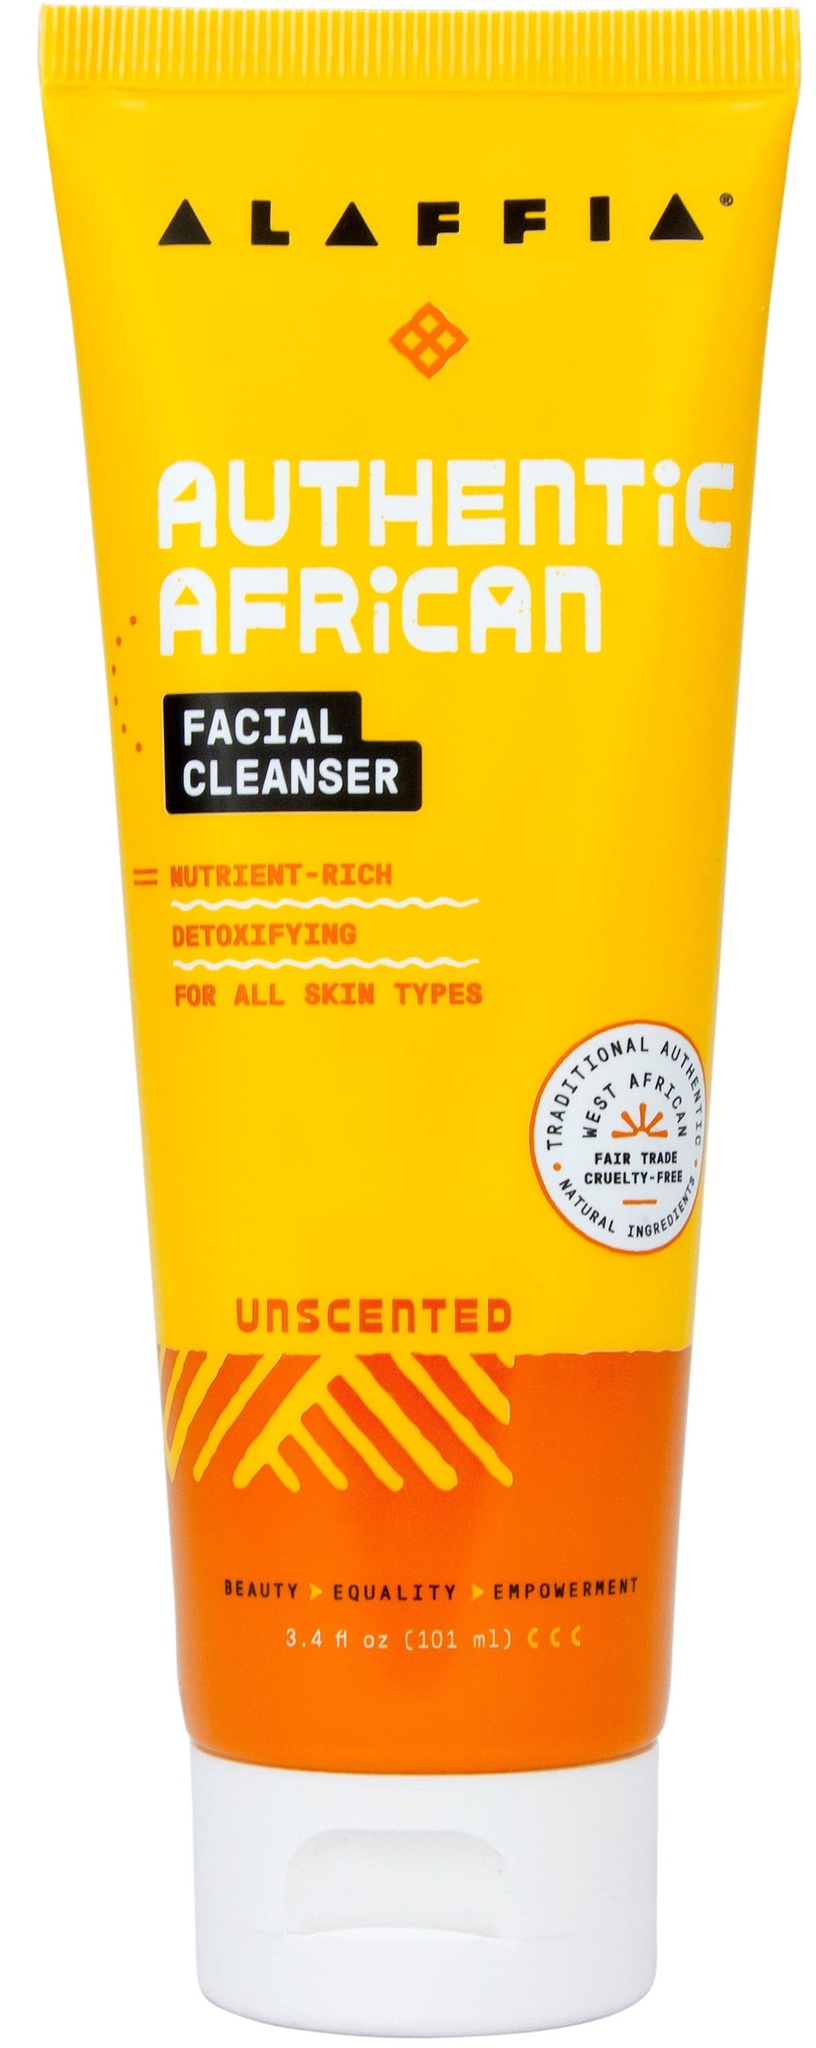 Alaffia Authentic African Facial Cleanser